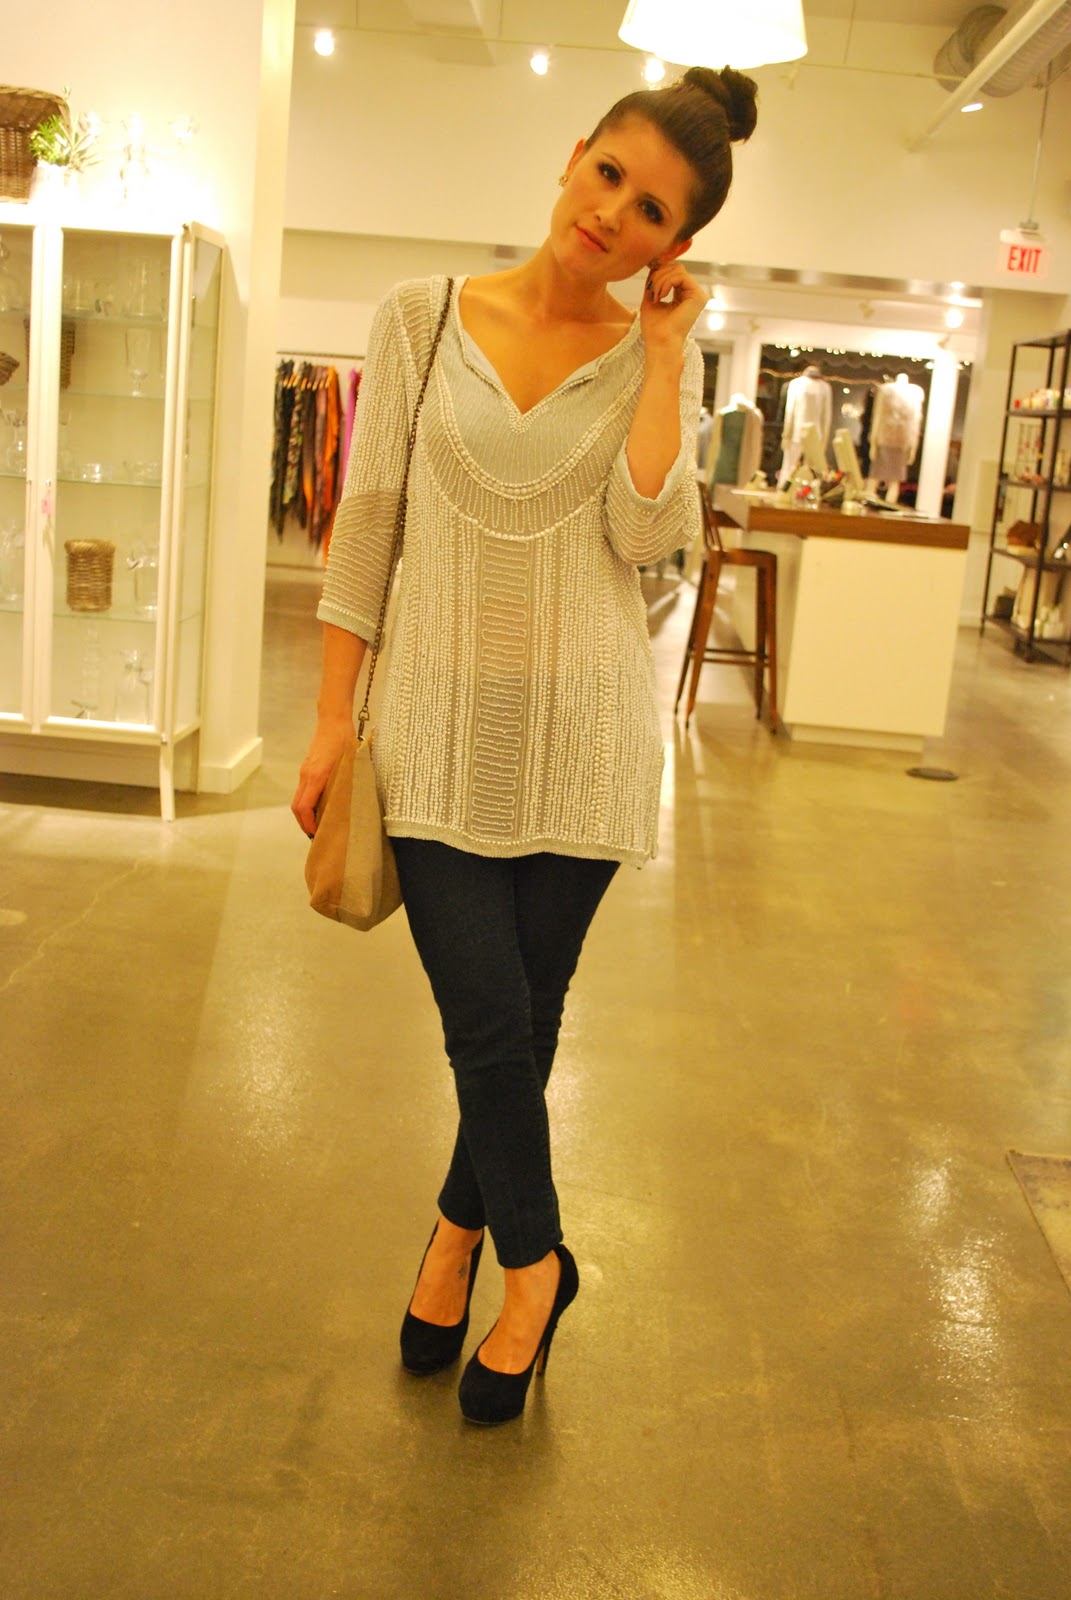 November Grey: Beaded Top & Jeans for a Holiday Party!